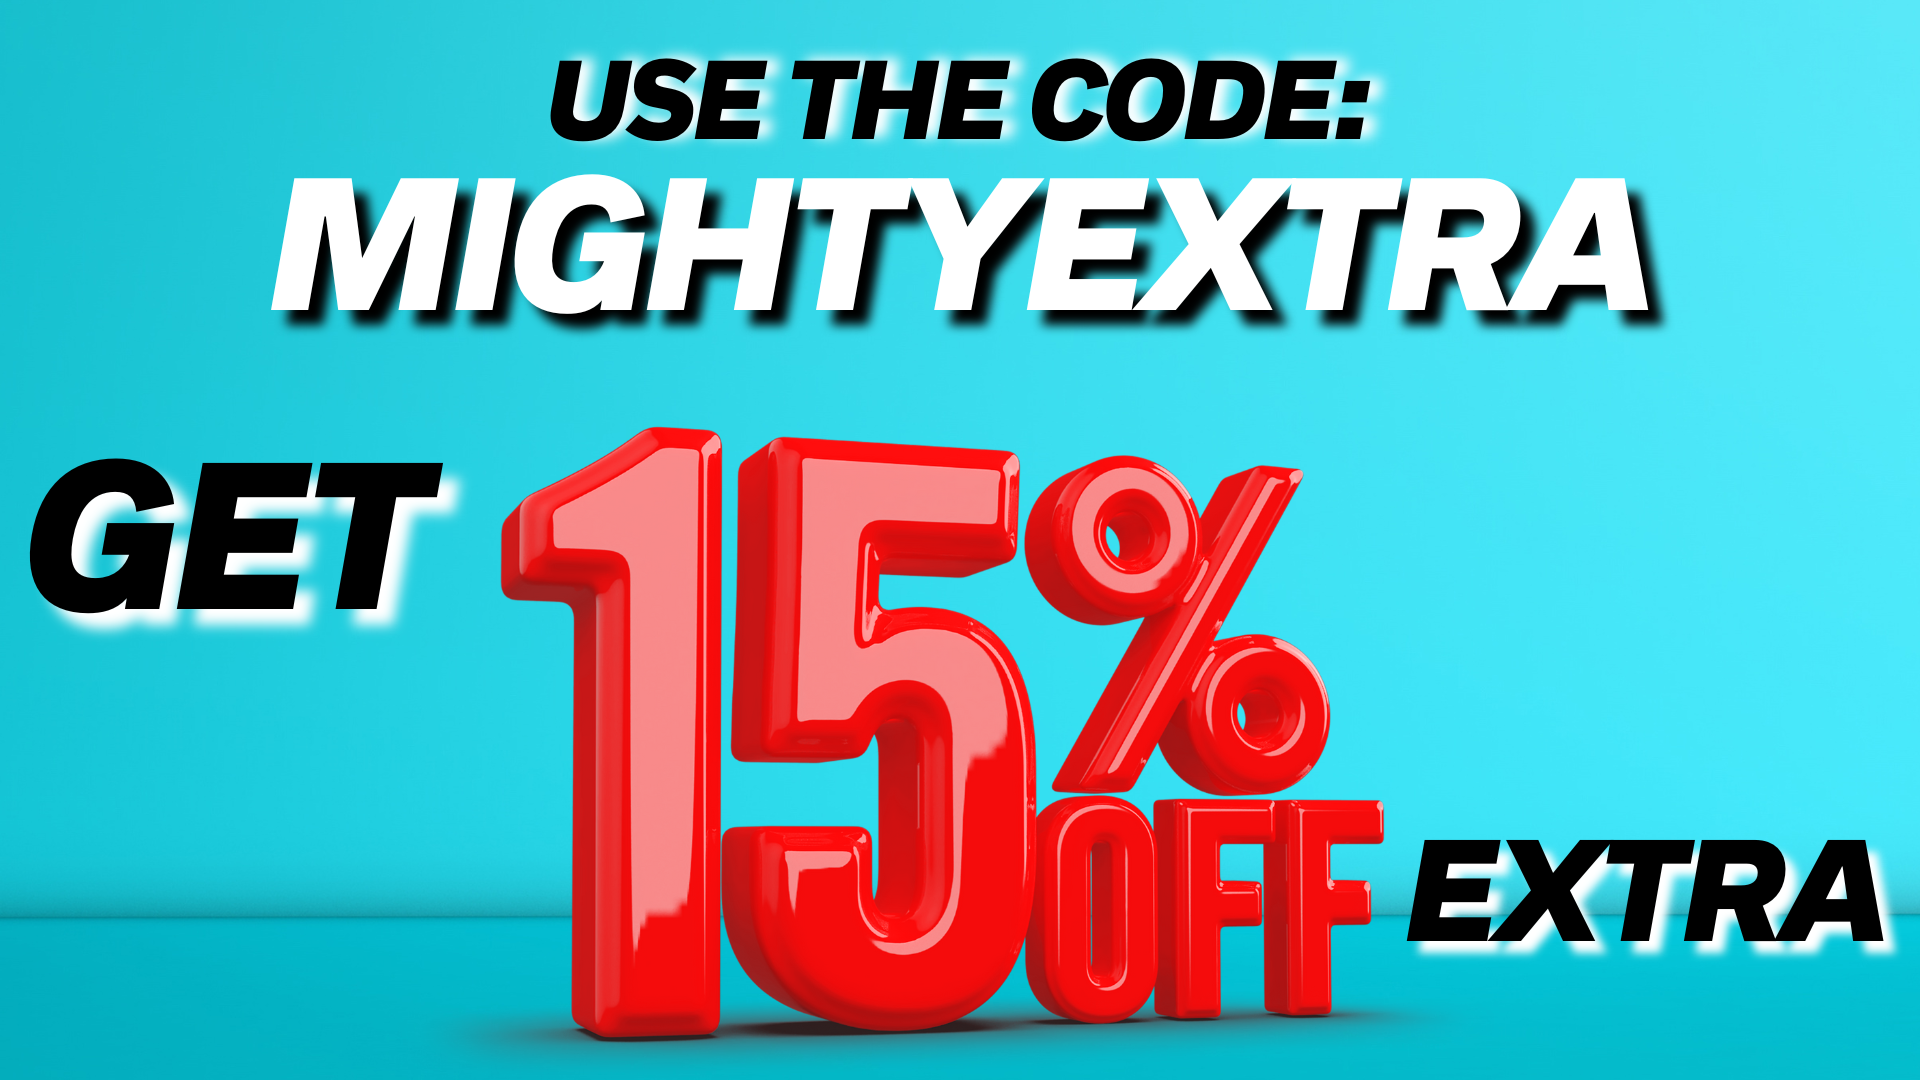 Don't miss out on this incredible deal - get a 15% discount on all item!